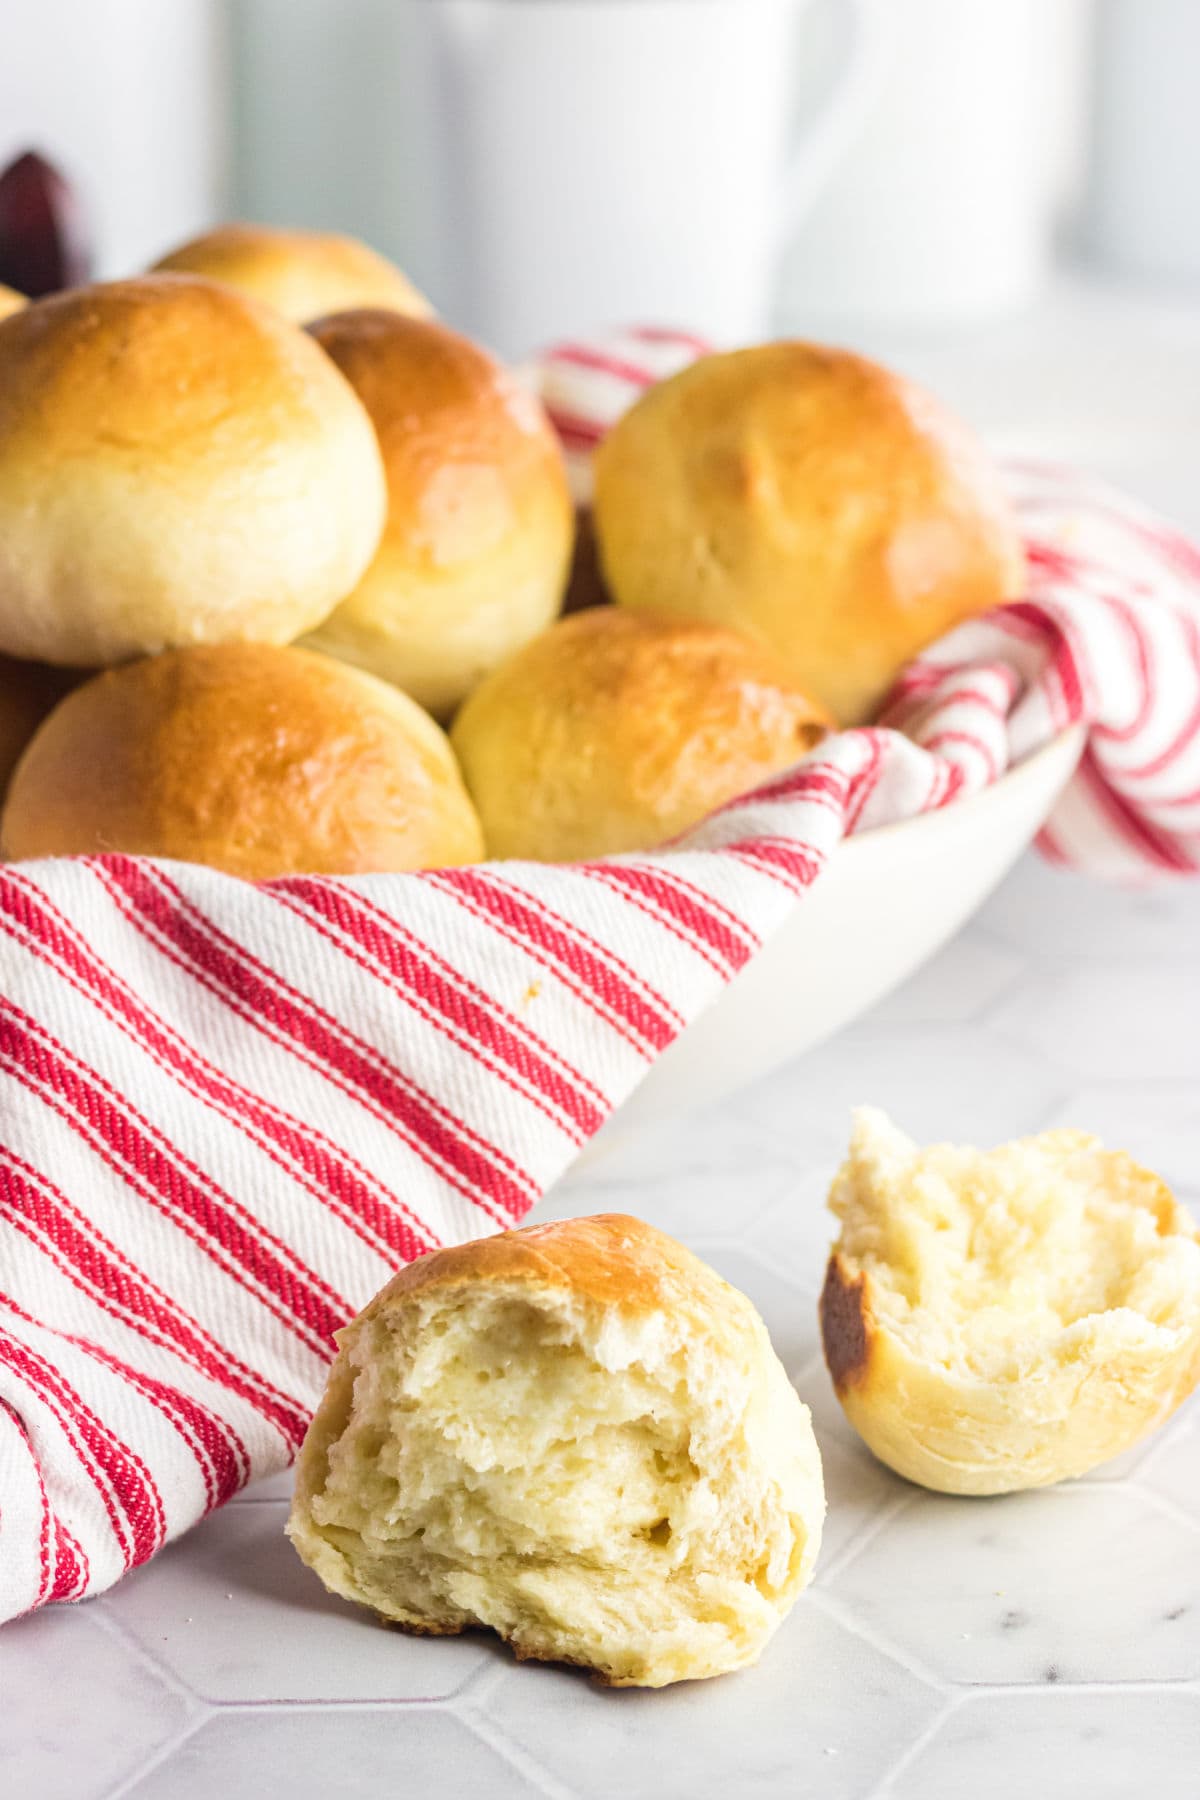 A basket of dinner rolls with one opened to show the soft interior.